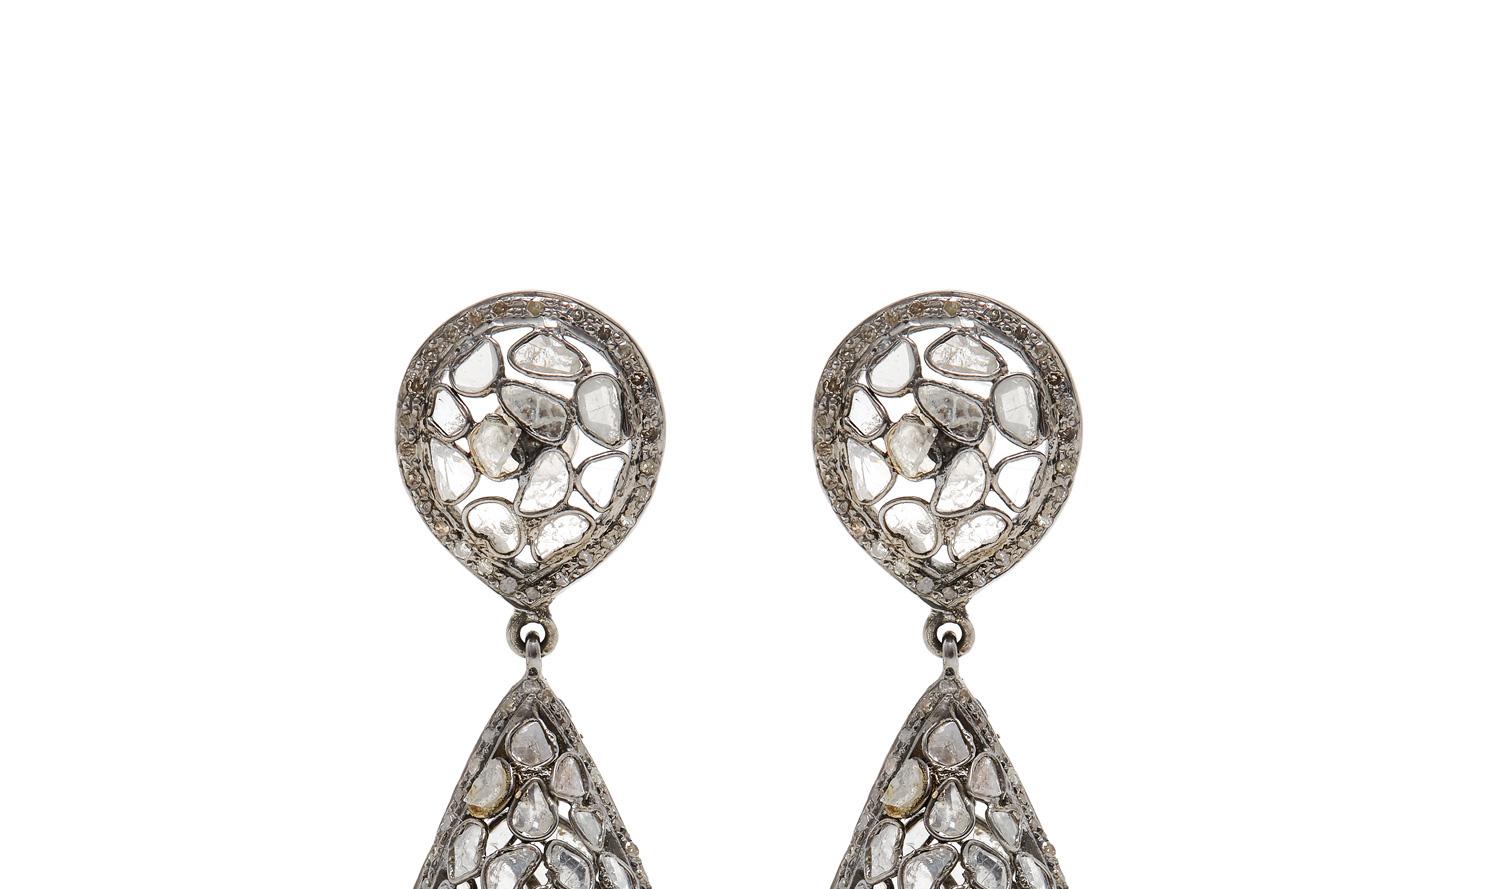 Grey Diamond Chandelier Dome Earrings featuring large hollow tear drop Silver dome earrings in hand crafted Silver lattice set with Grey and White Diamonds.

- Set with finely shaved Polki and Single Cut Diamonds.
- Dimensions:  40mm in length, 10mm